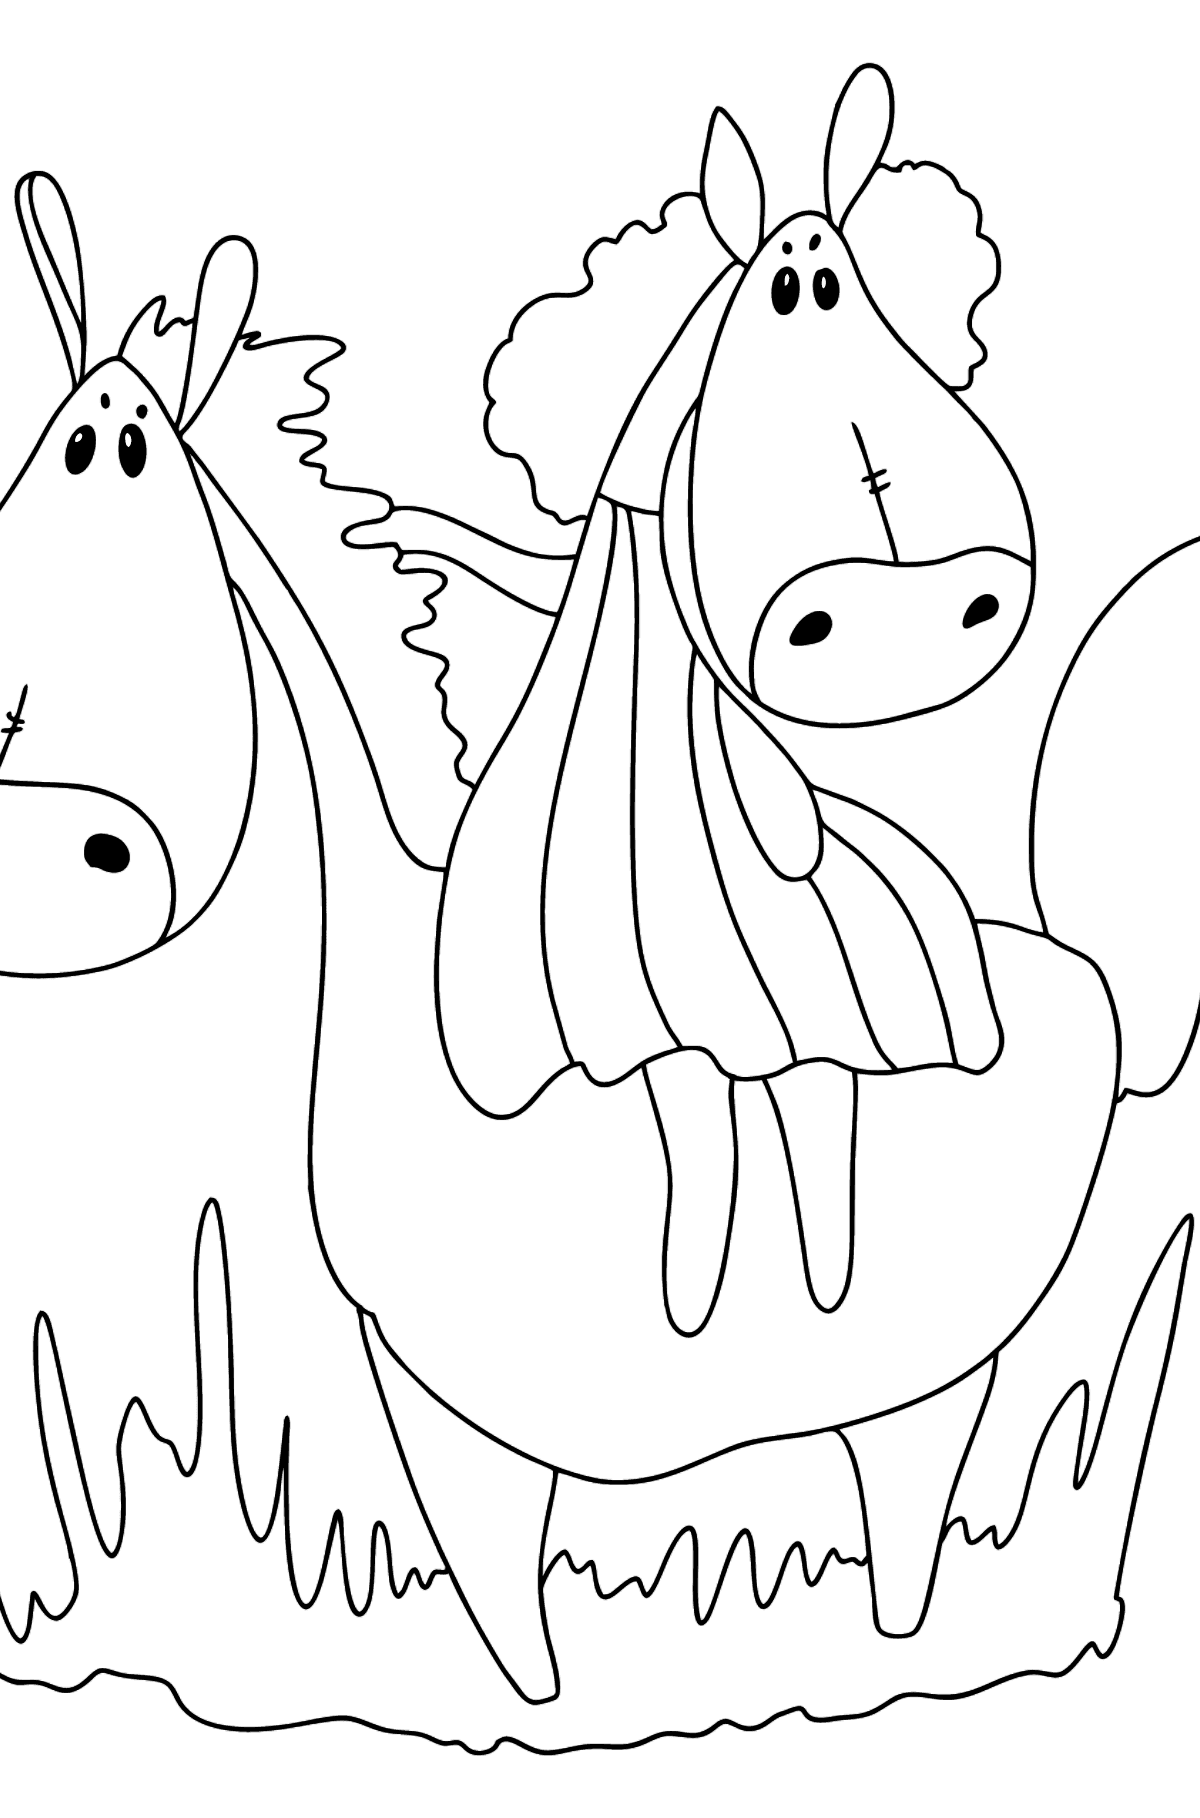 Difficult coloring page a horse for a walk - Coloring Pages for Kids